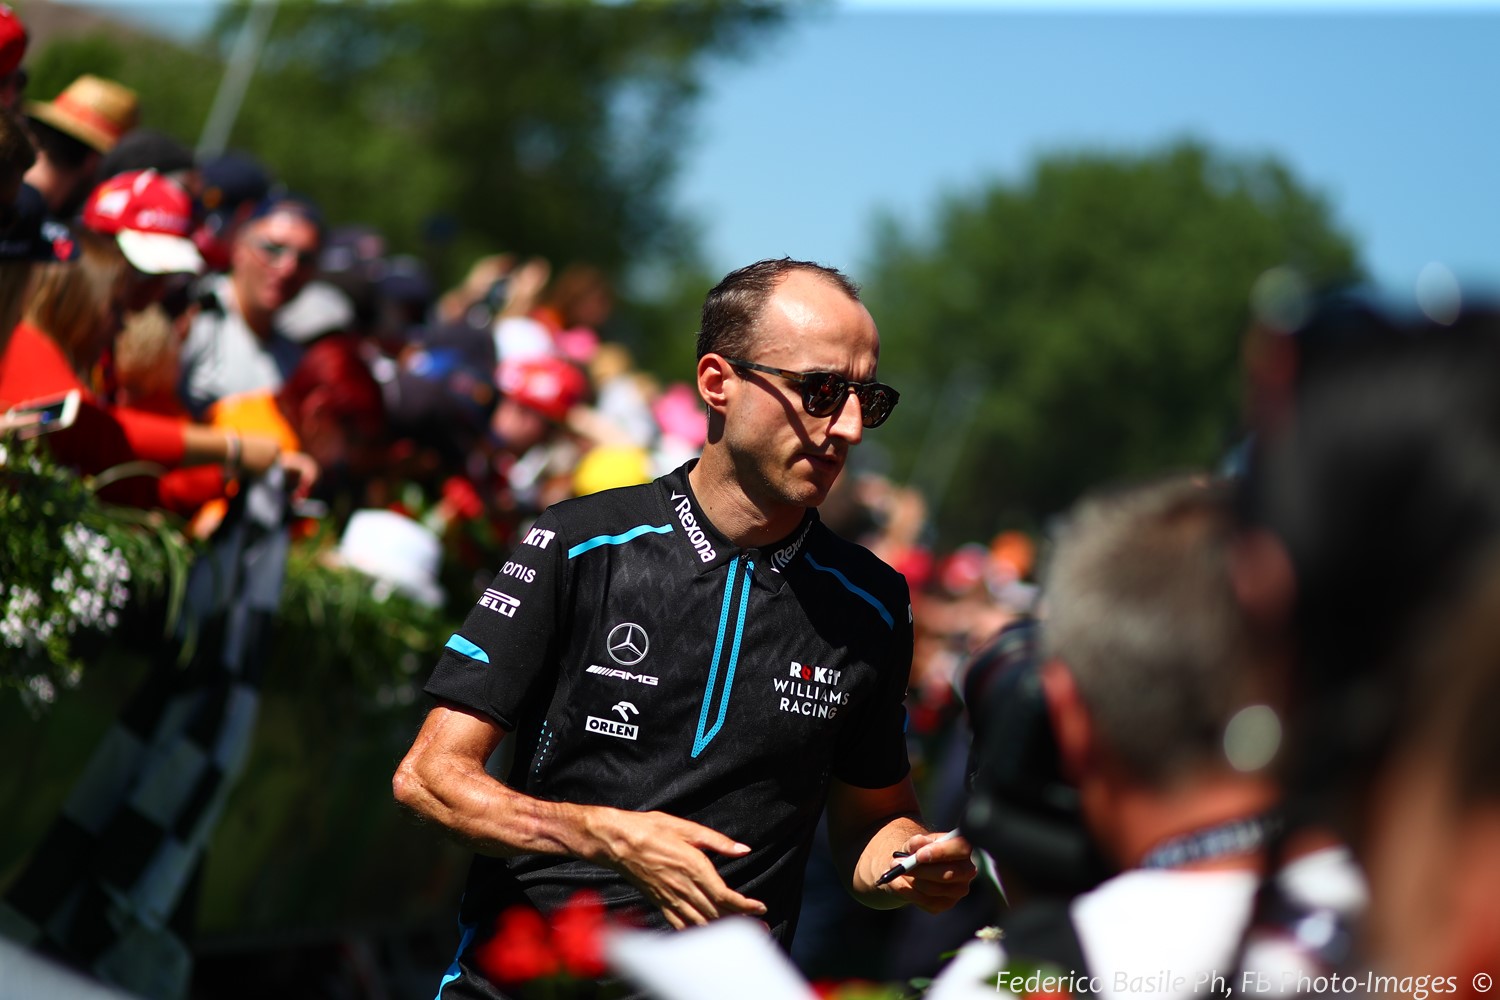 Kubica signing autographs in Austria. He was so slow he was lapped 3 times